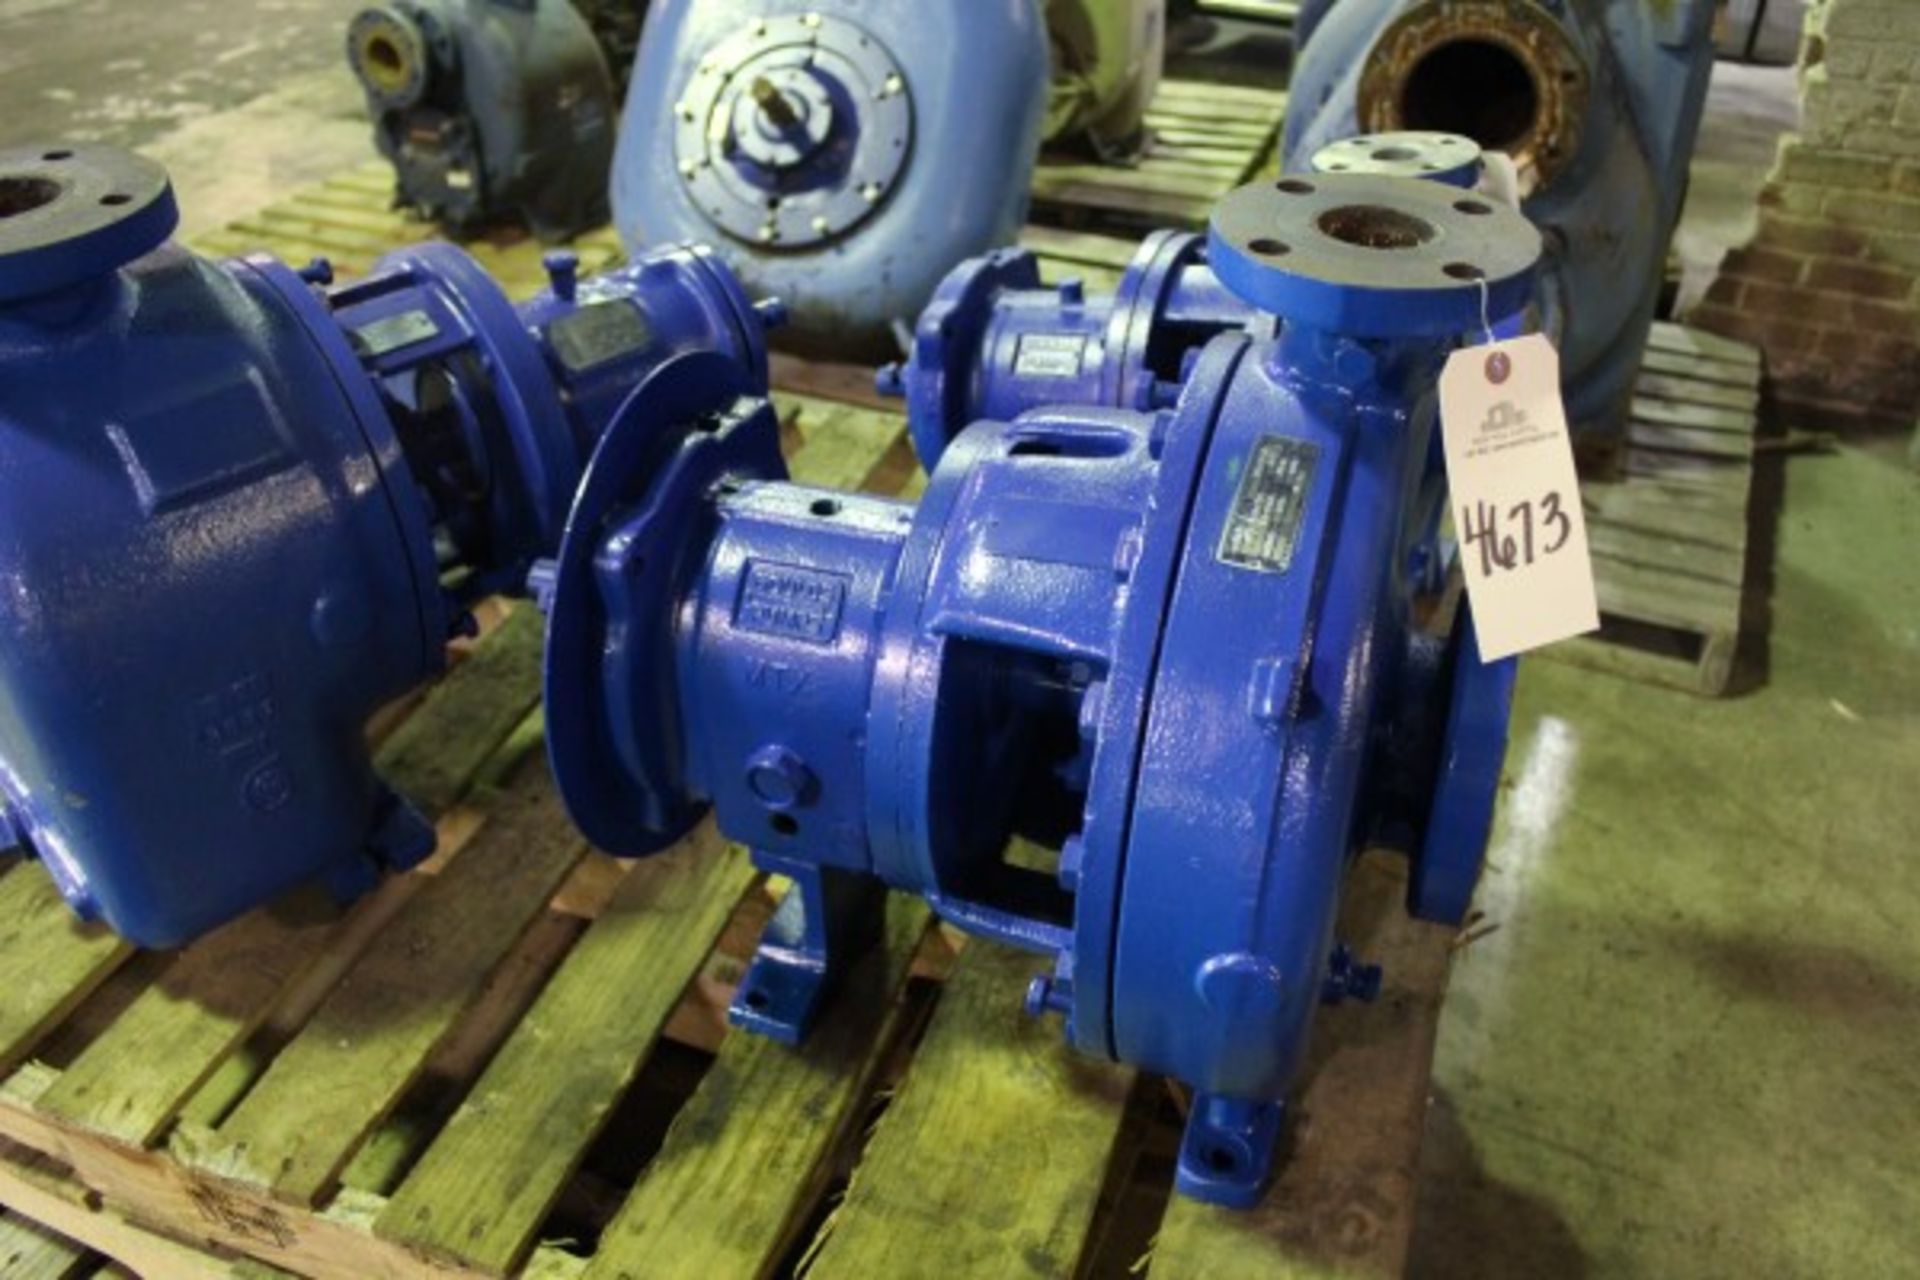 Goulds 2 x 3-13 Pump | Seller to load for $10 per lot or buyers may remove hand carry items by